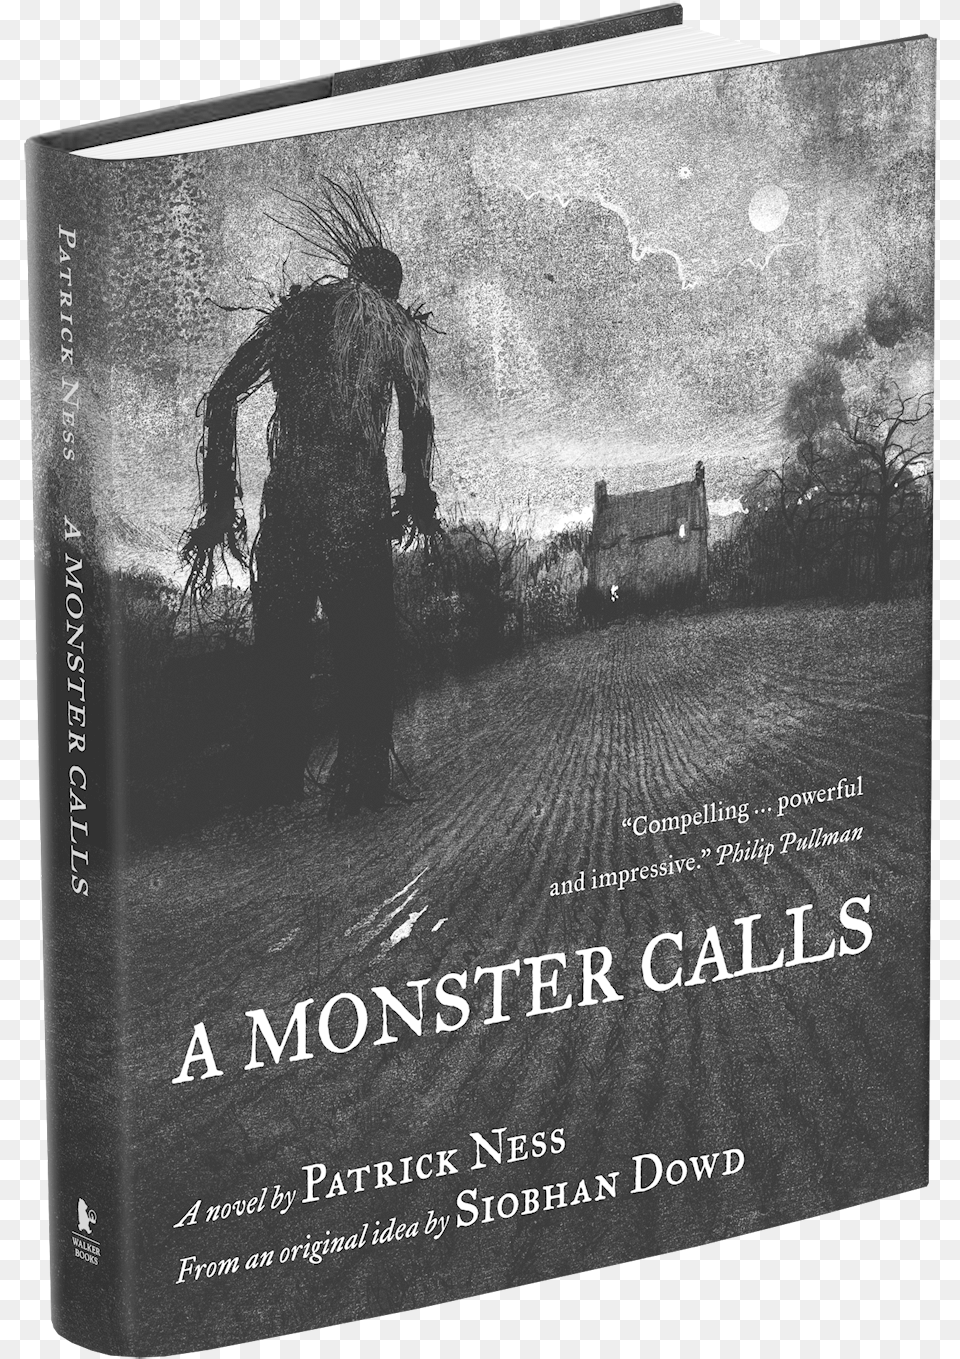 Purple And Gold Book Spine Monster Calls By Patrick Ness Pdf, Publication, Adult, Person, Man Png Image